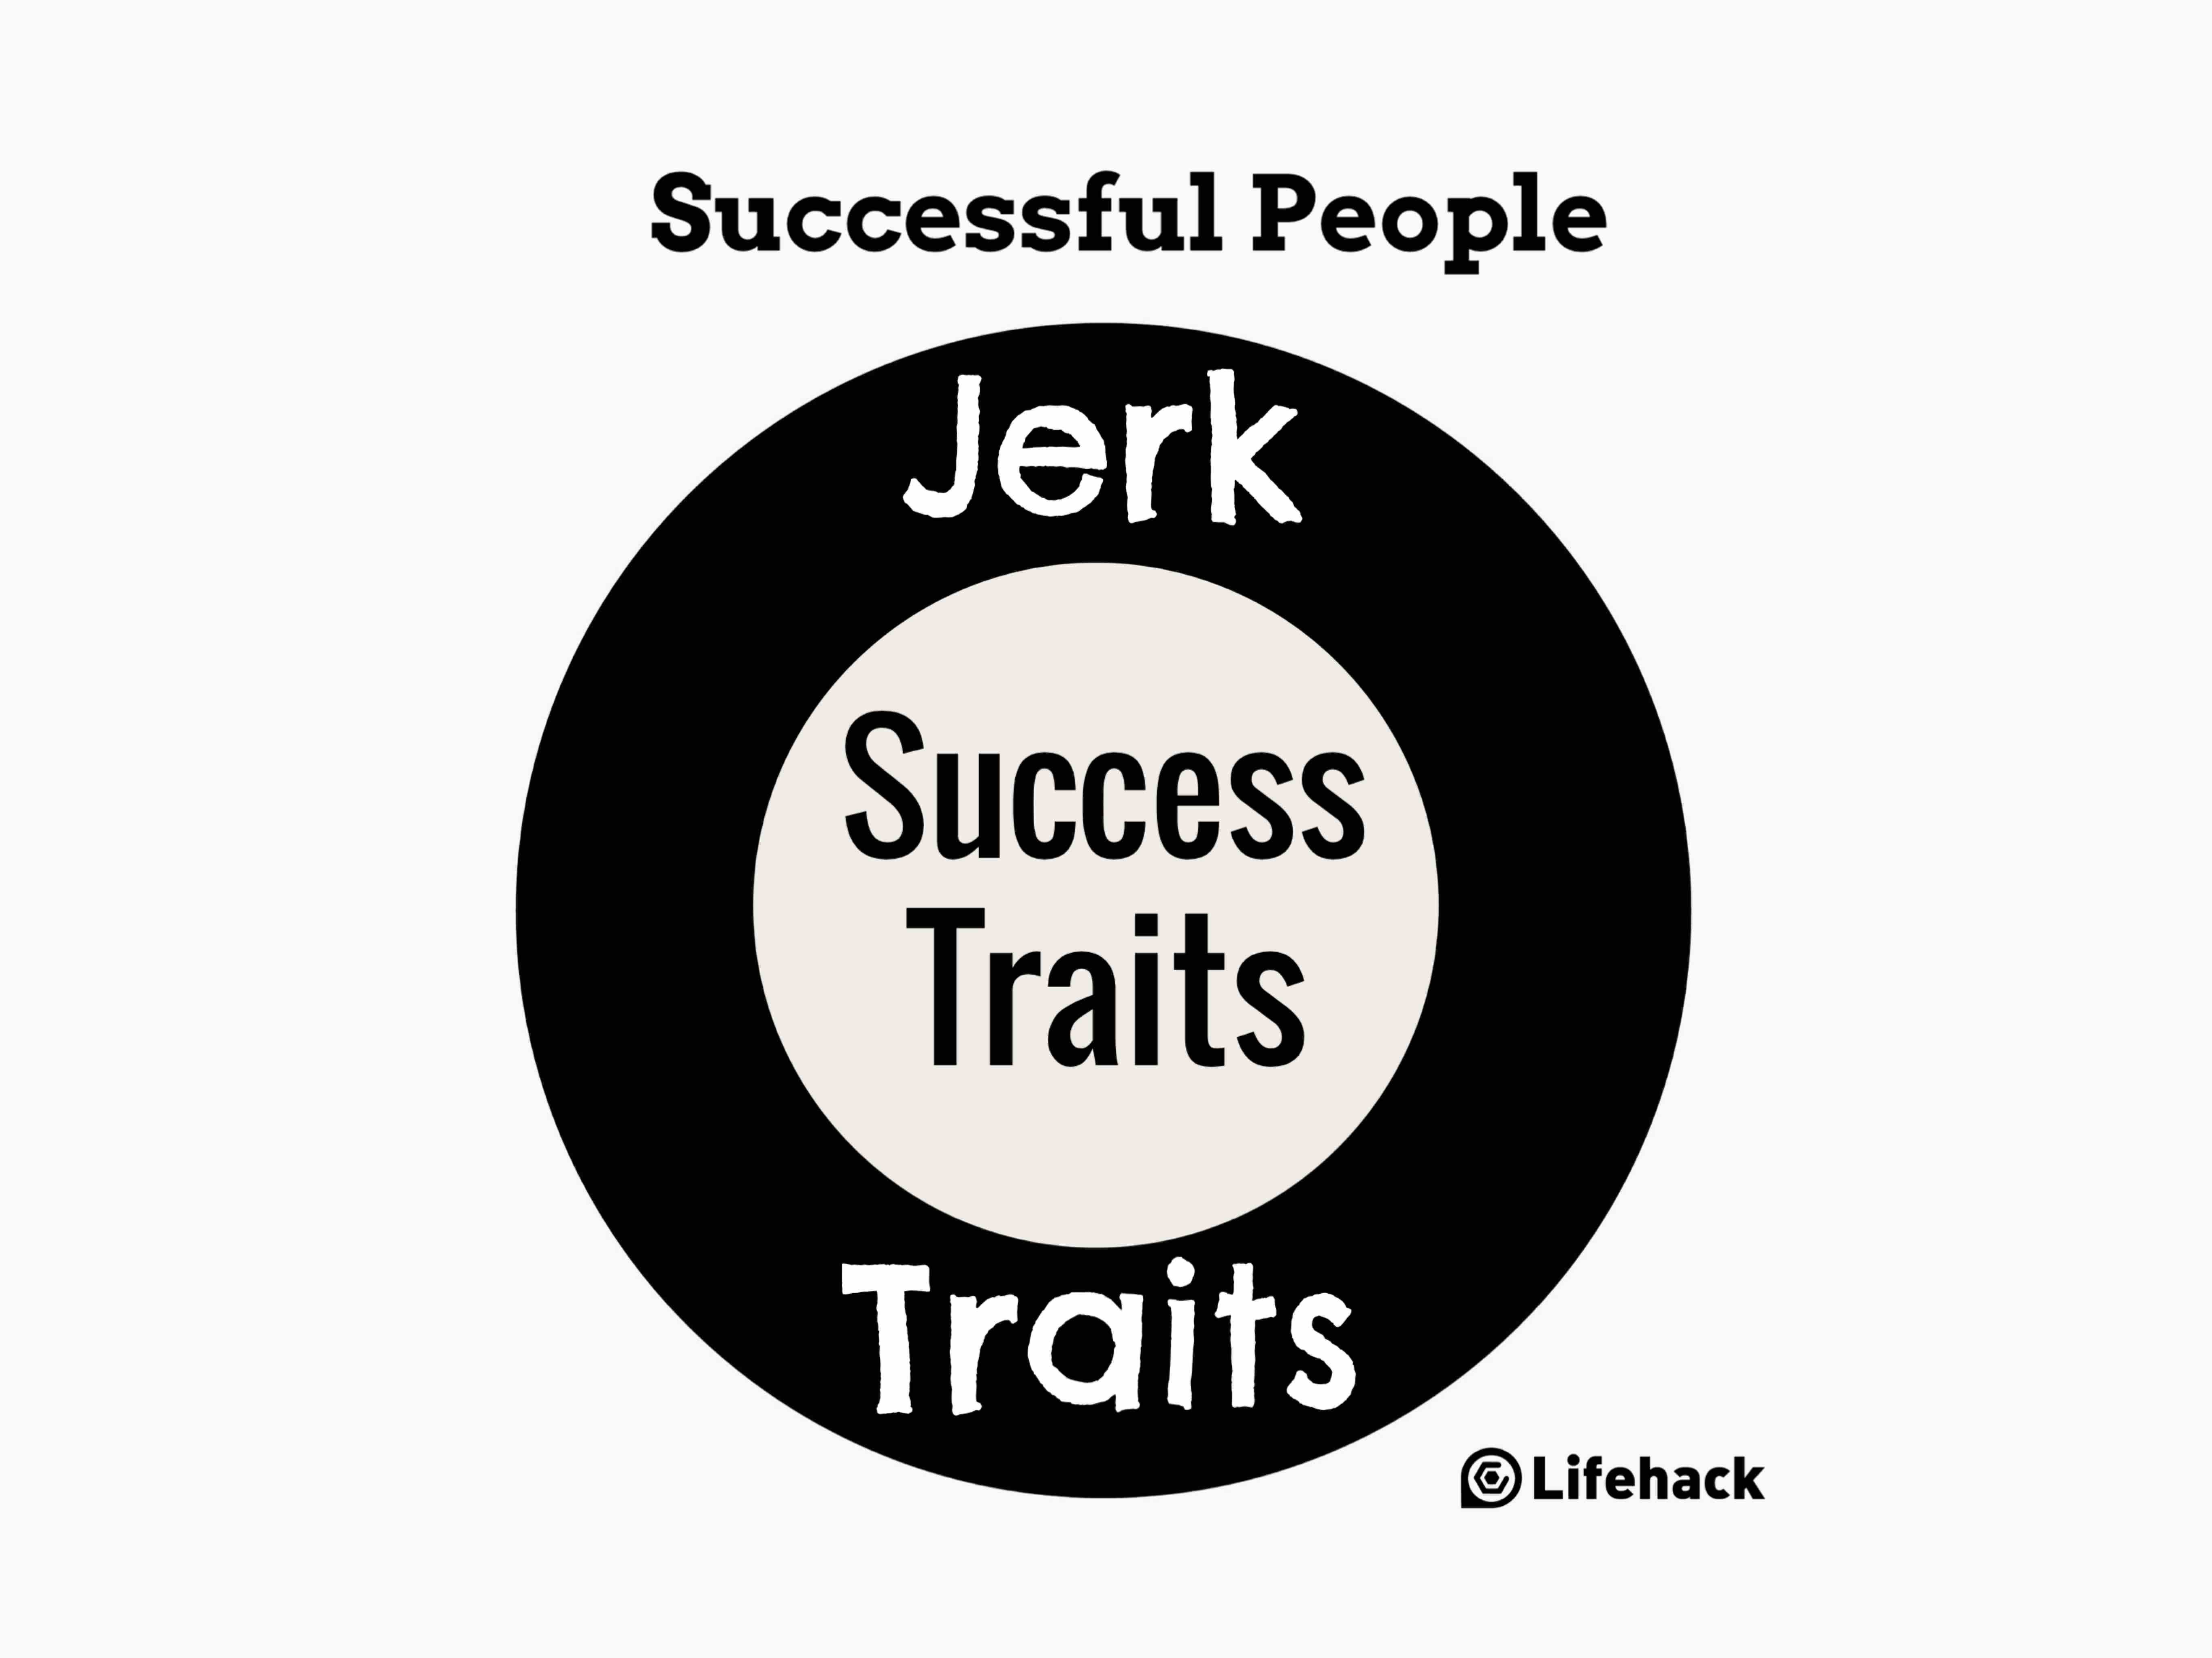 Do You Need to Be a Jerk to Become Successful?